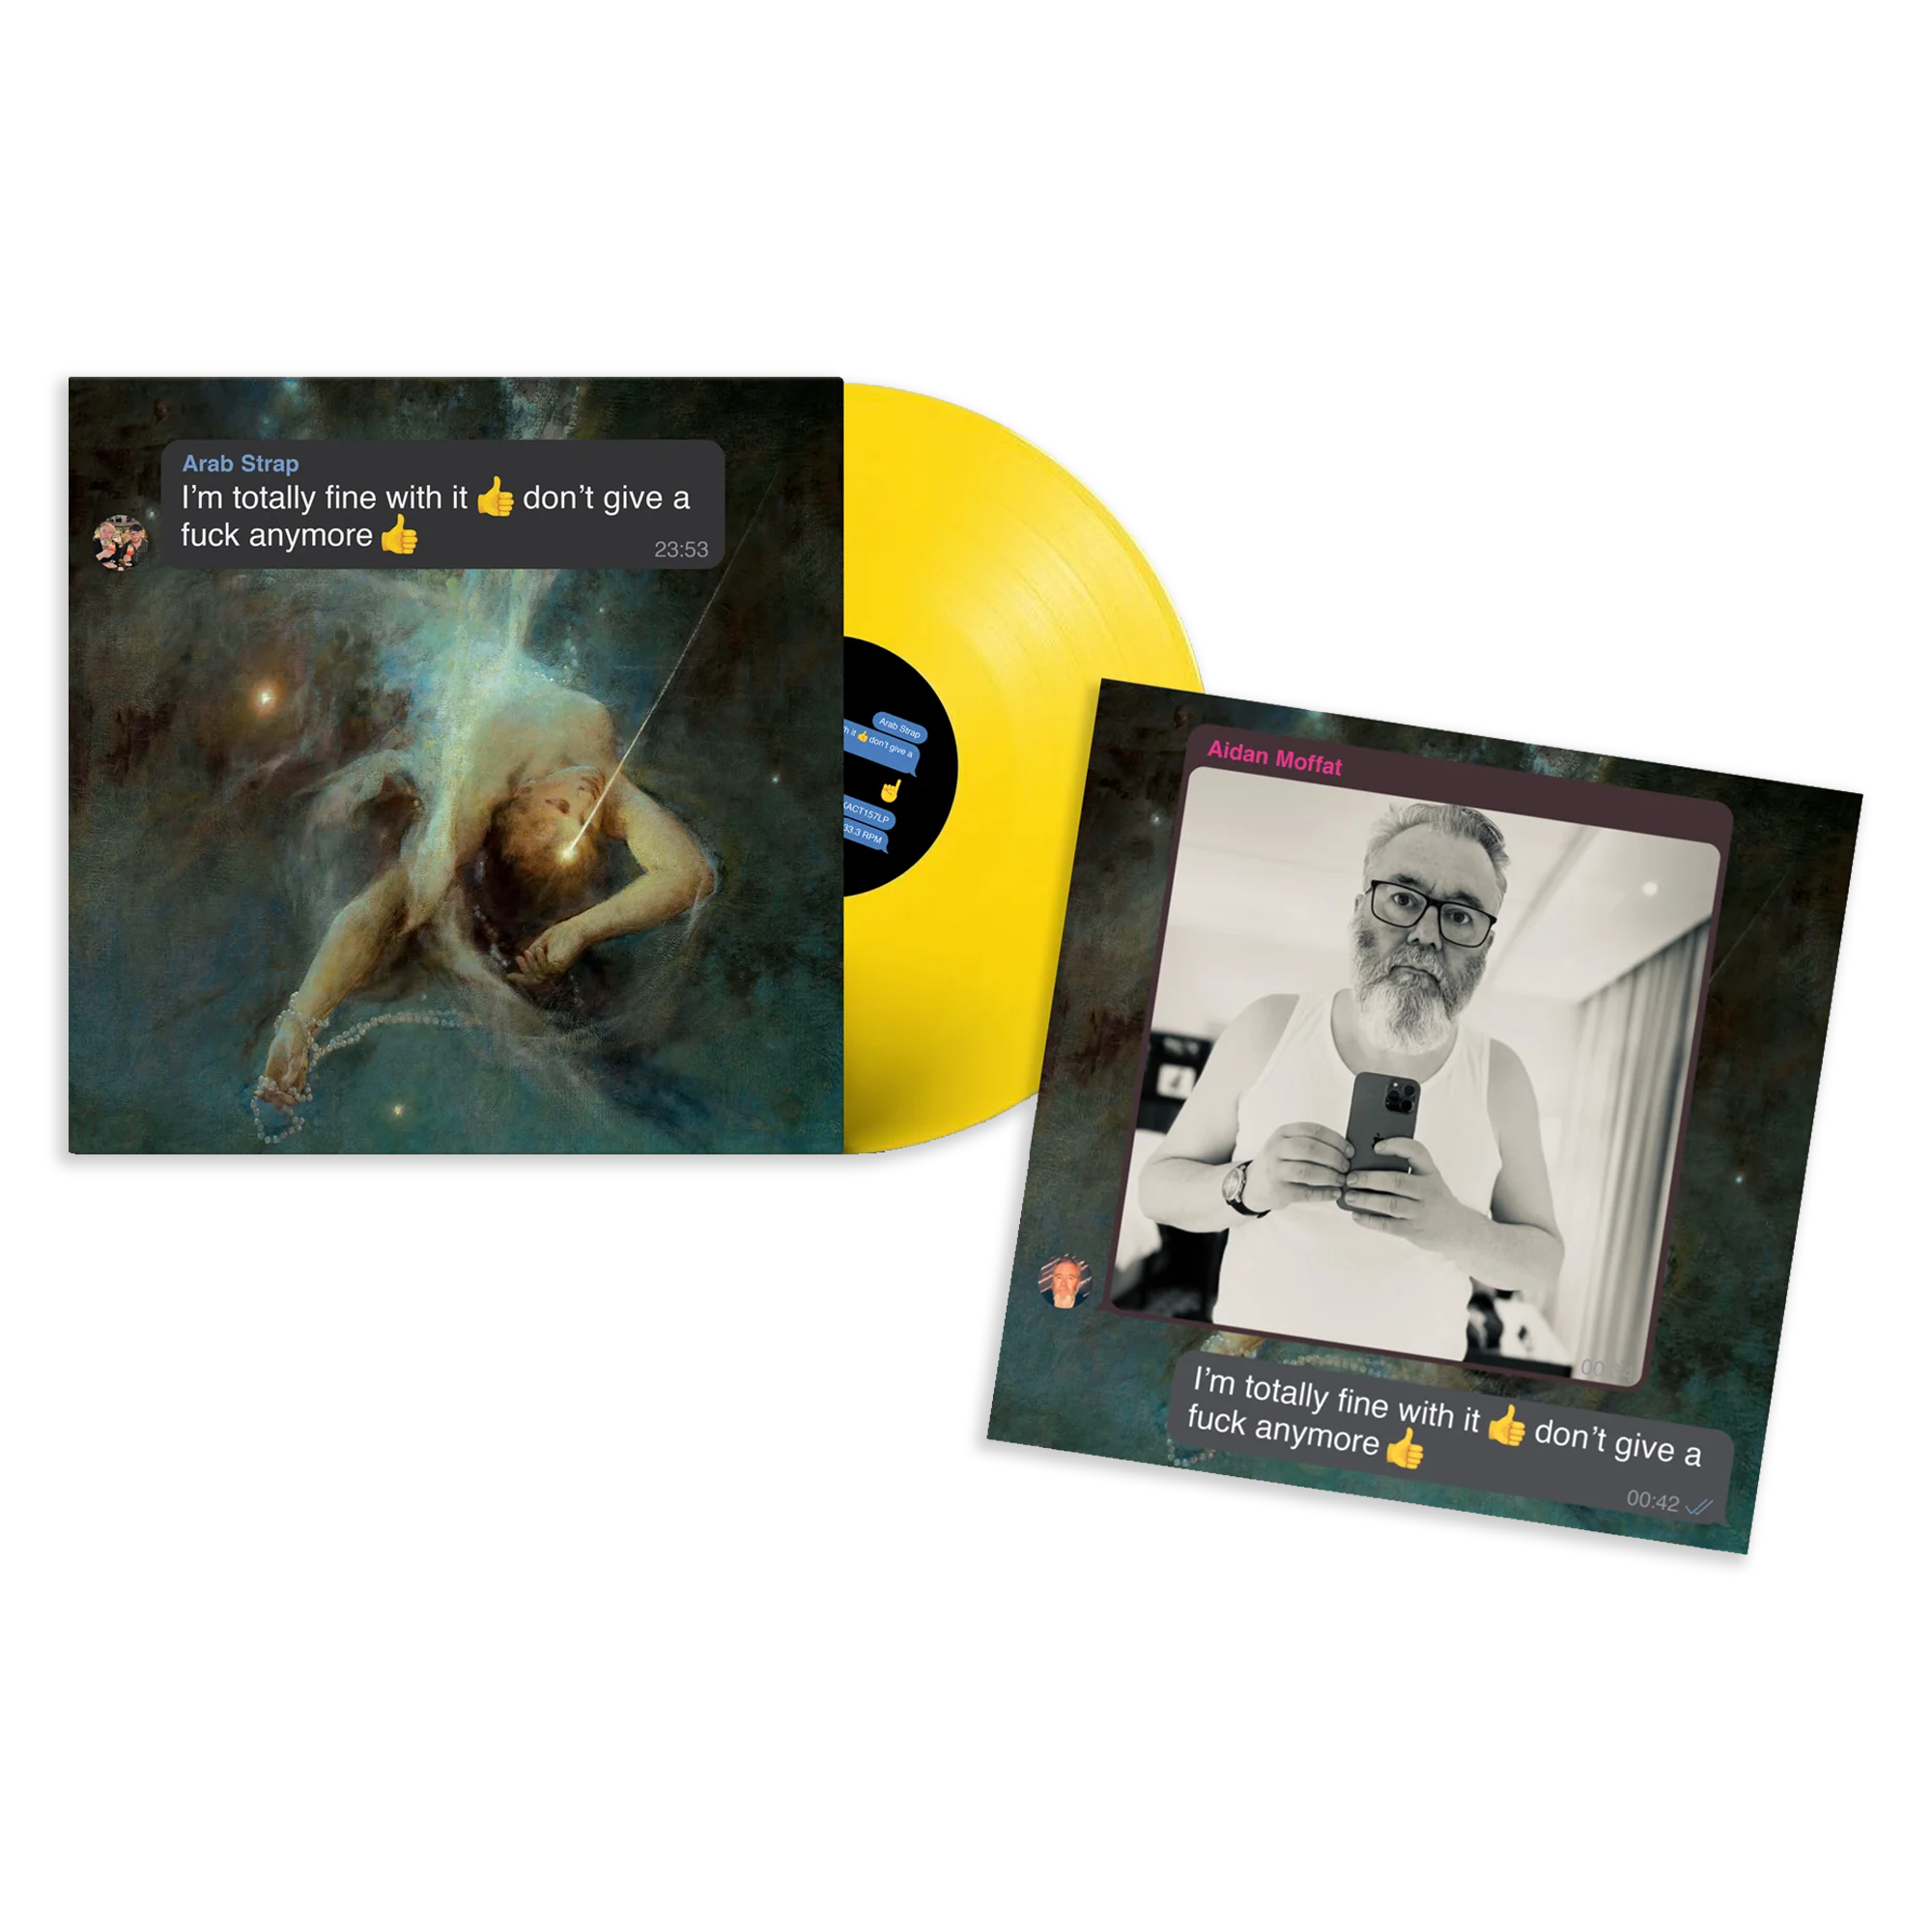 I’m totally fine with it 👍don’t give a fuck anymore 👍: Limited Emoji Yellow Vinyl LP + Signed Double-Sided Print